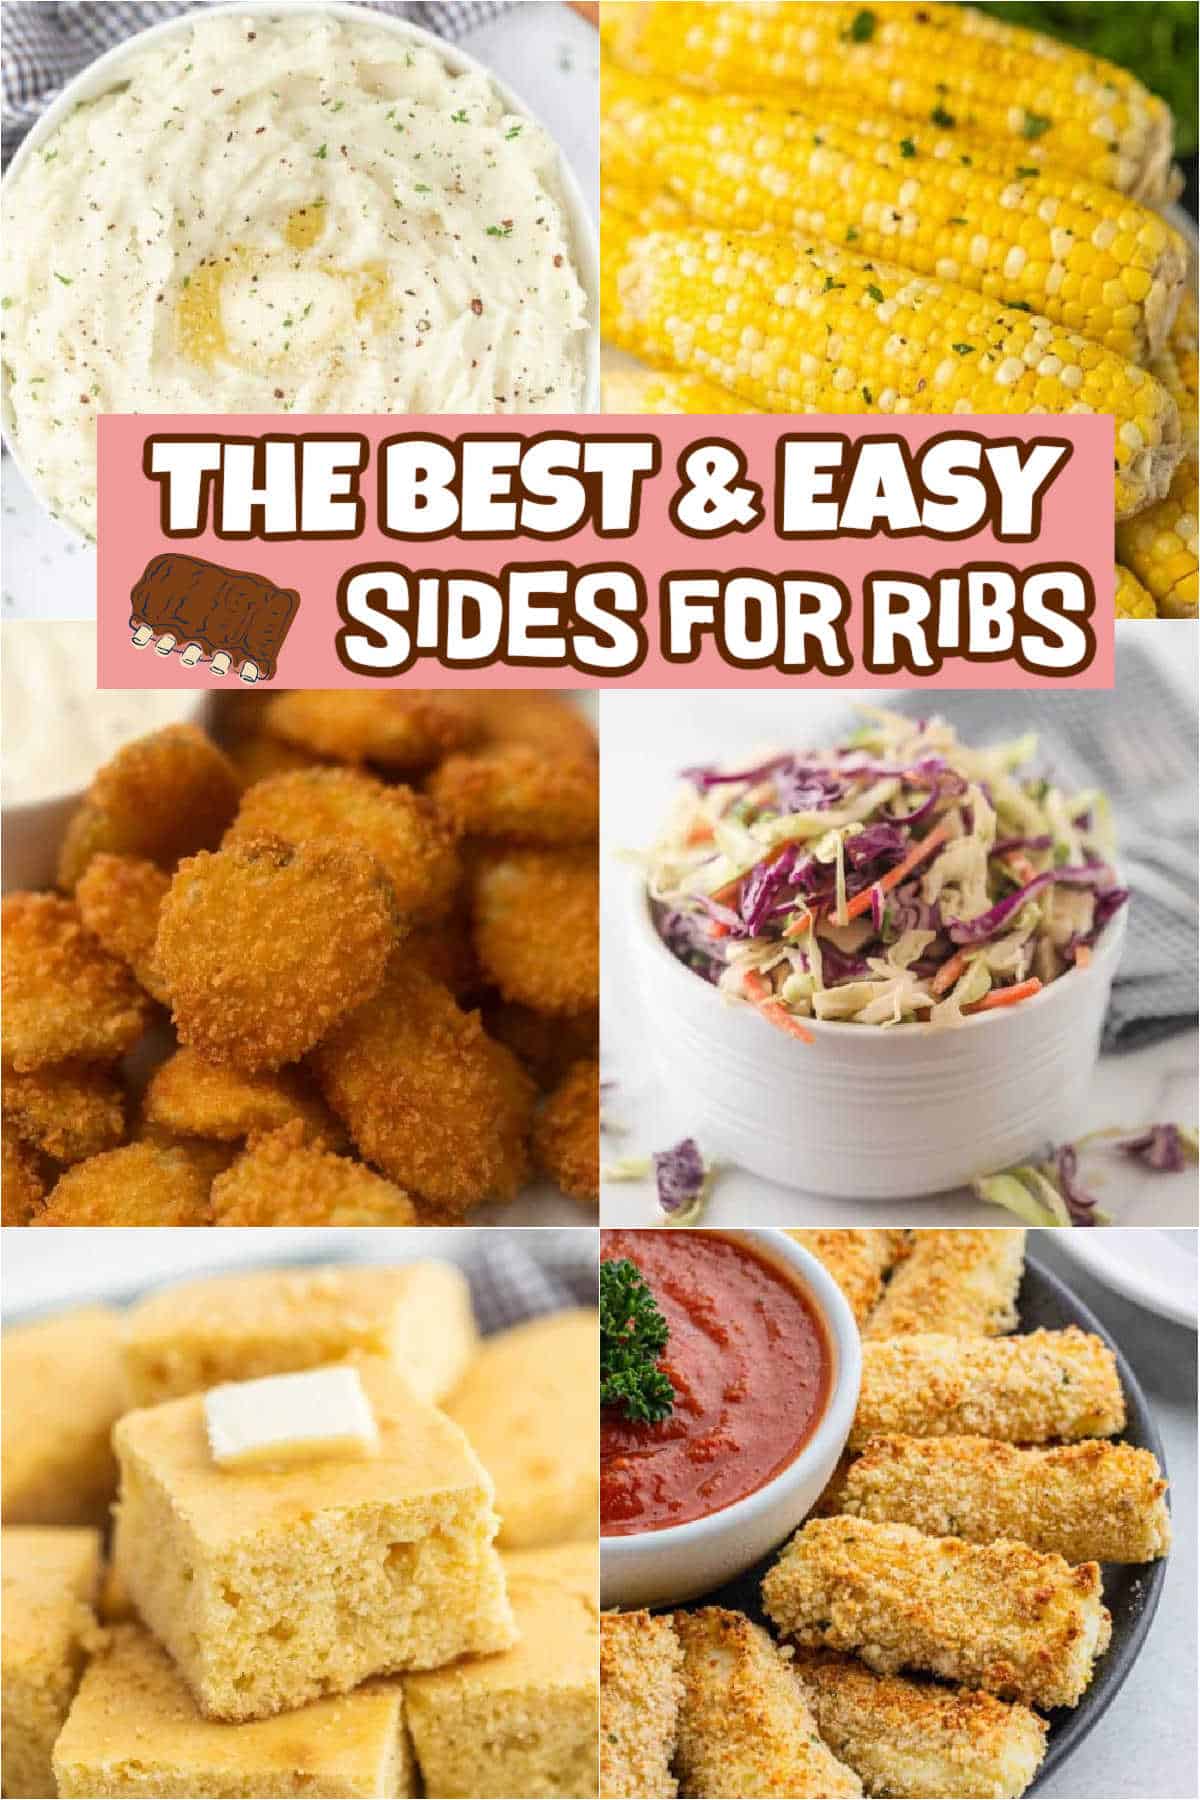 33 sides for ribs you are going to love in less than 30 minutes. Try the best side dishes for ribs that are easy and delicious. If you are tired of the same sides with ribs, take a look at these delicious ideas. Each recipe is quick and easy. Many recipes take just 30 minutes or less. #eatingonadime #bestsidesforribs #ribsidedishes